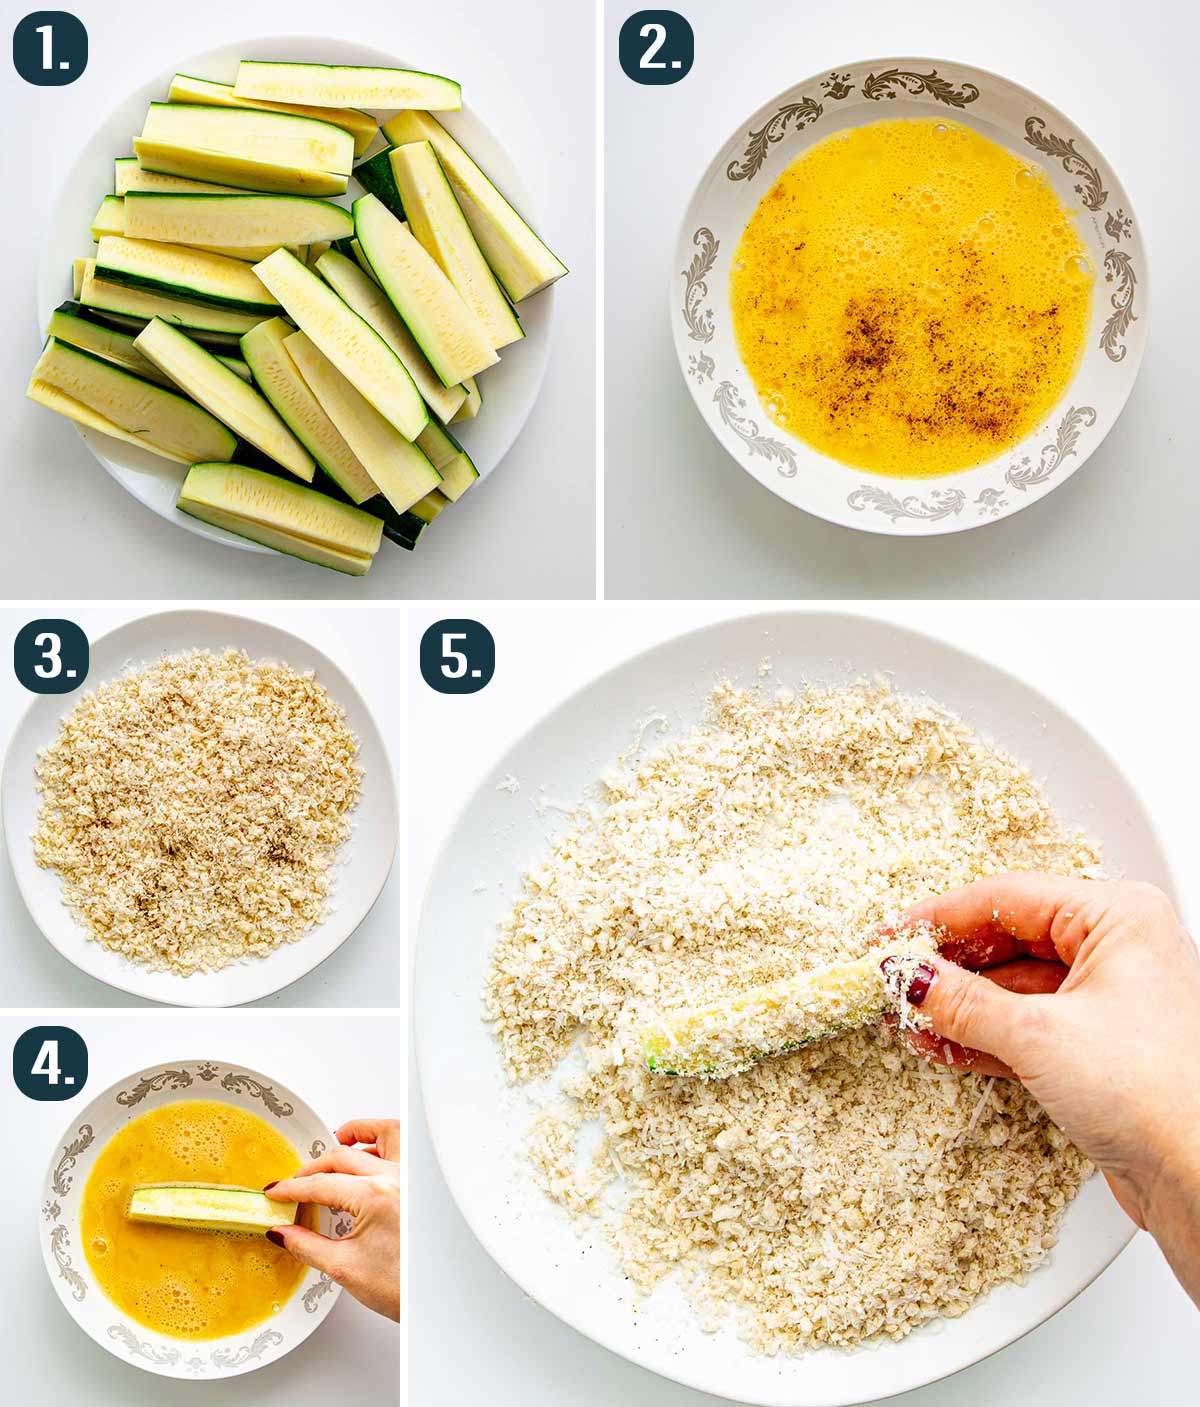 detailed process shots showing how to make breaded parmesan zucchini sticks.